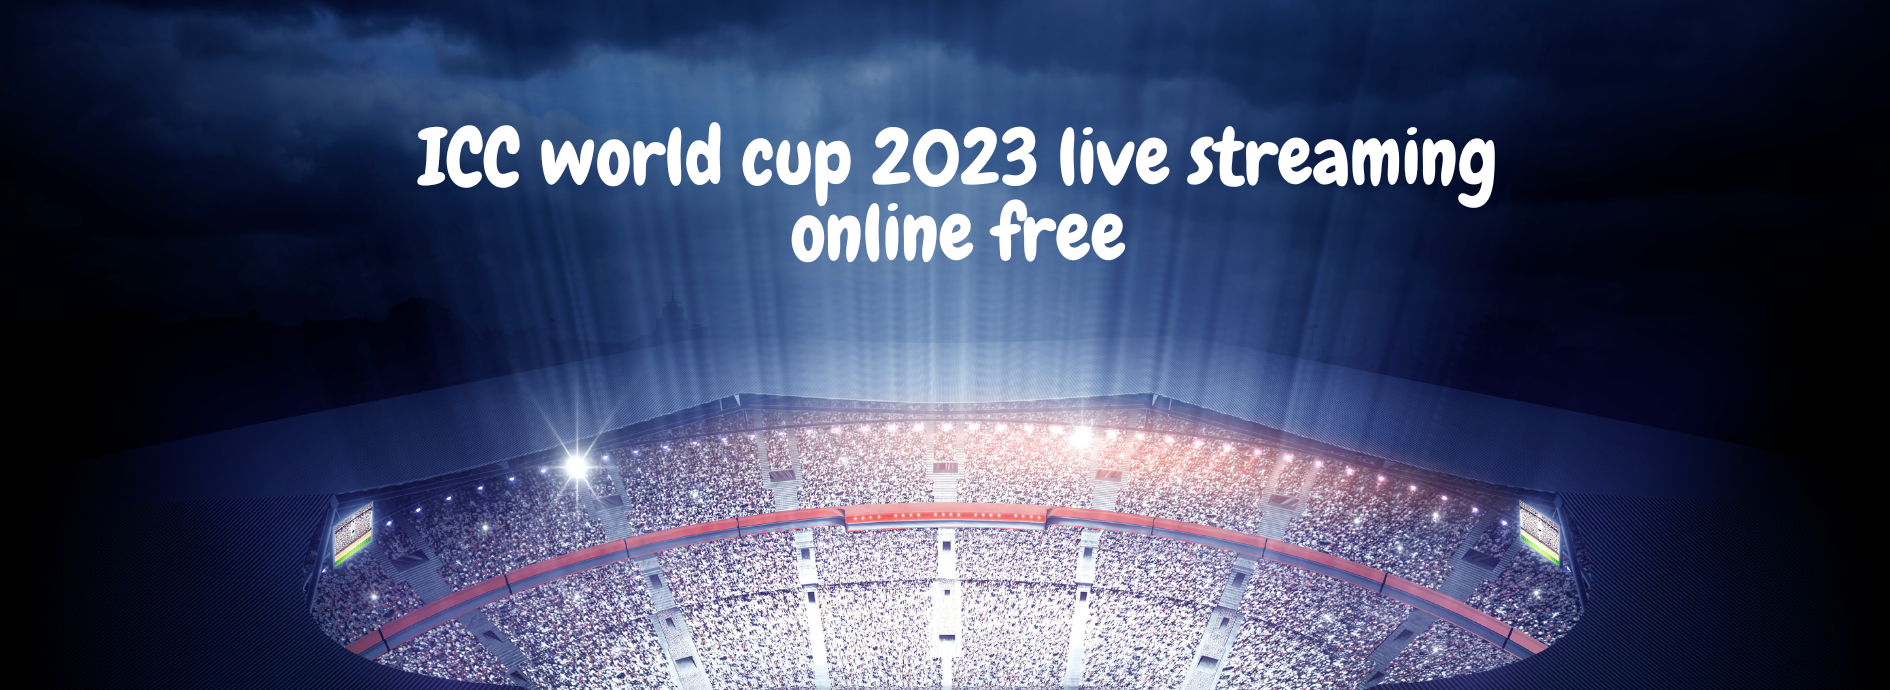 icc world cup 2023 live streaming online free